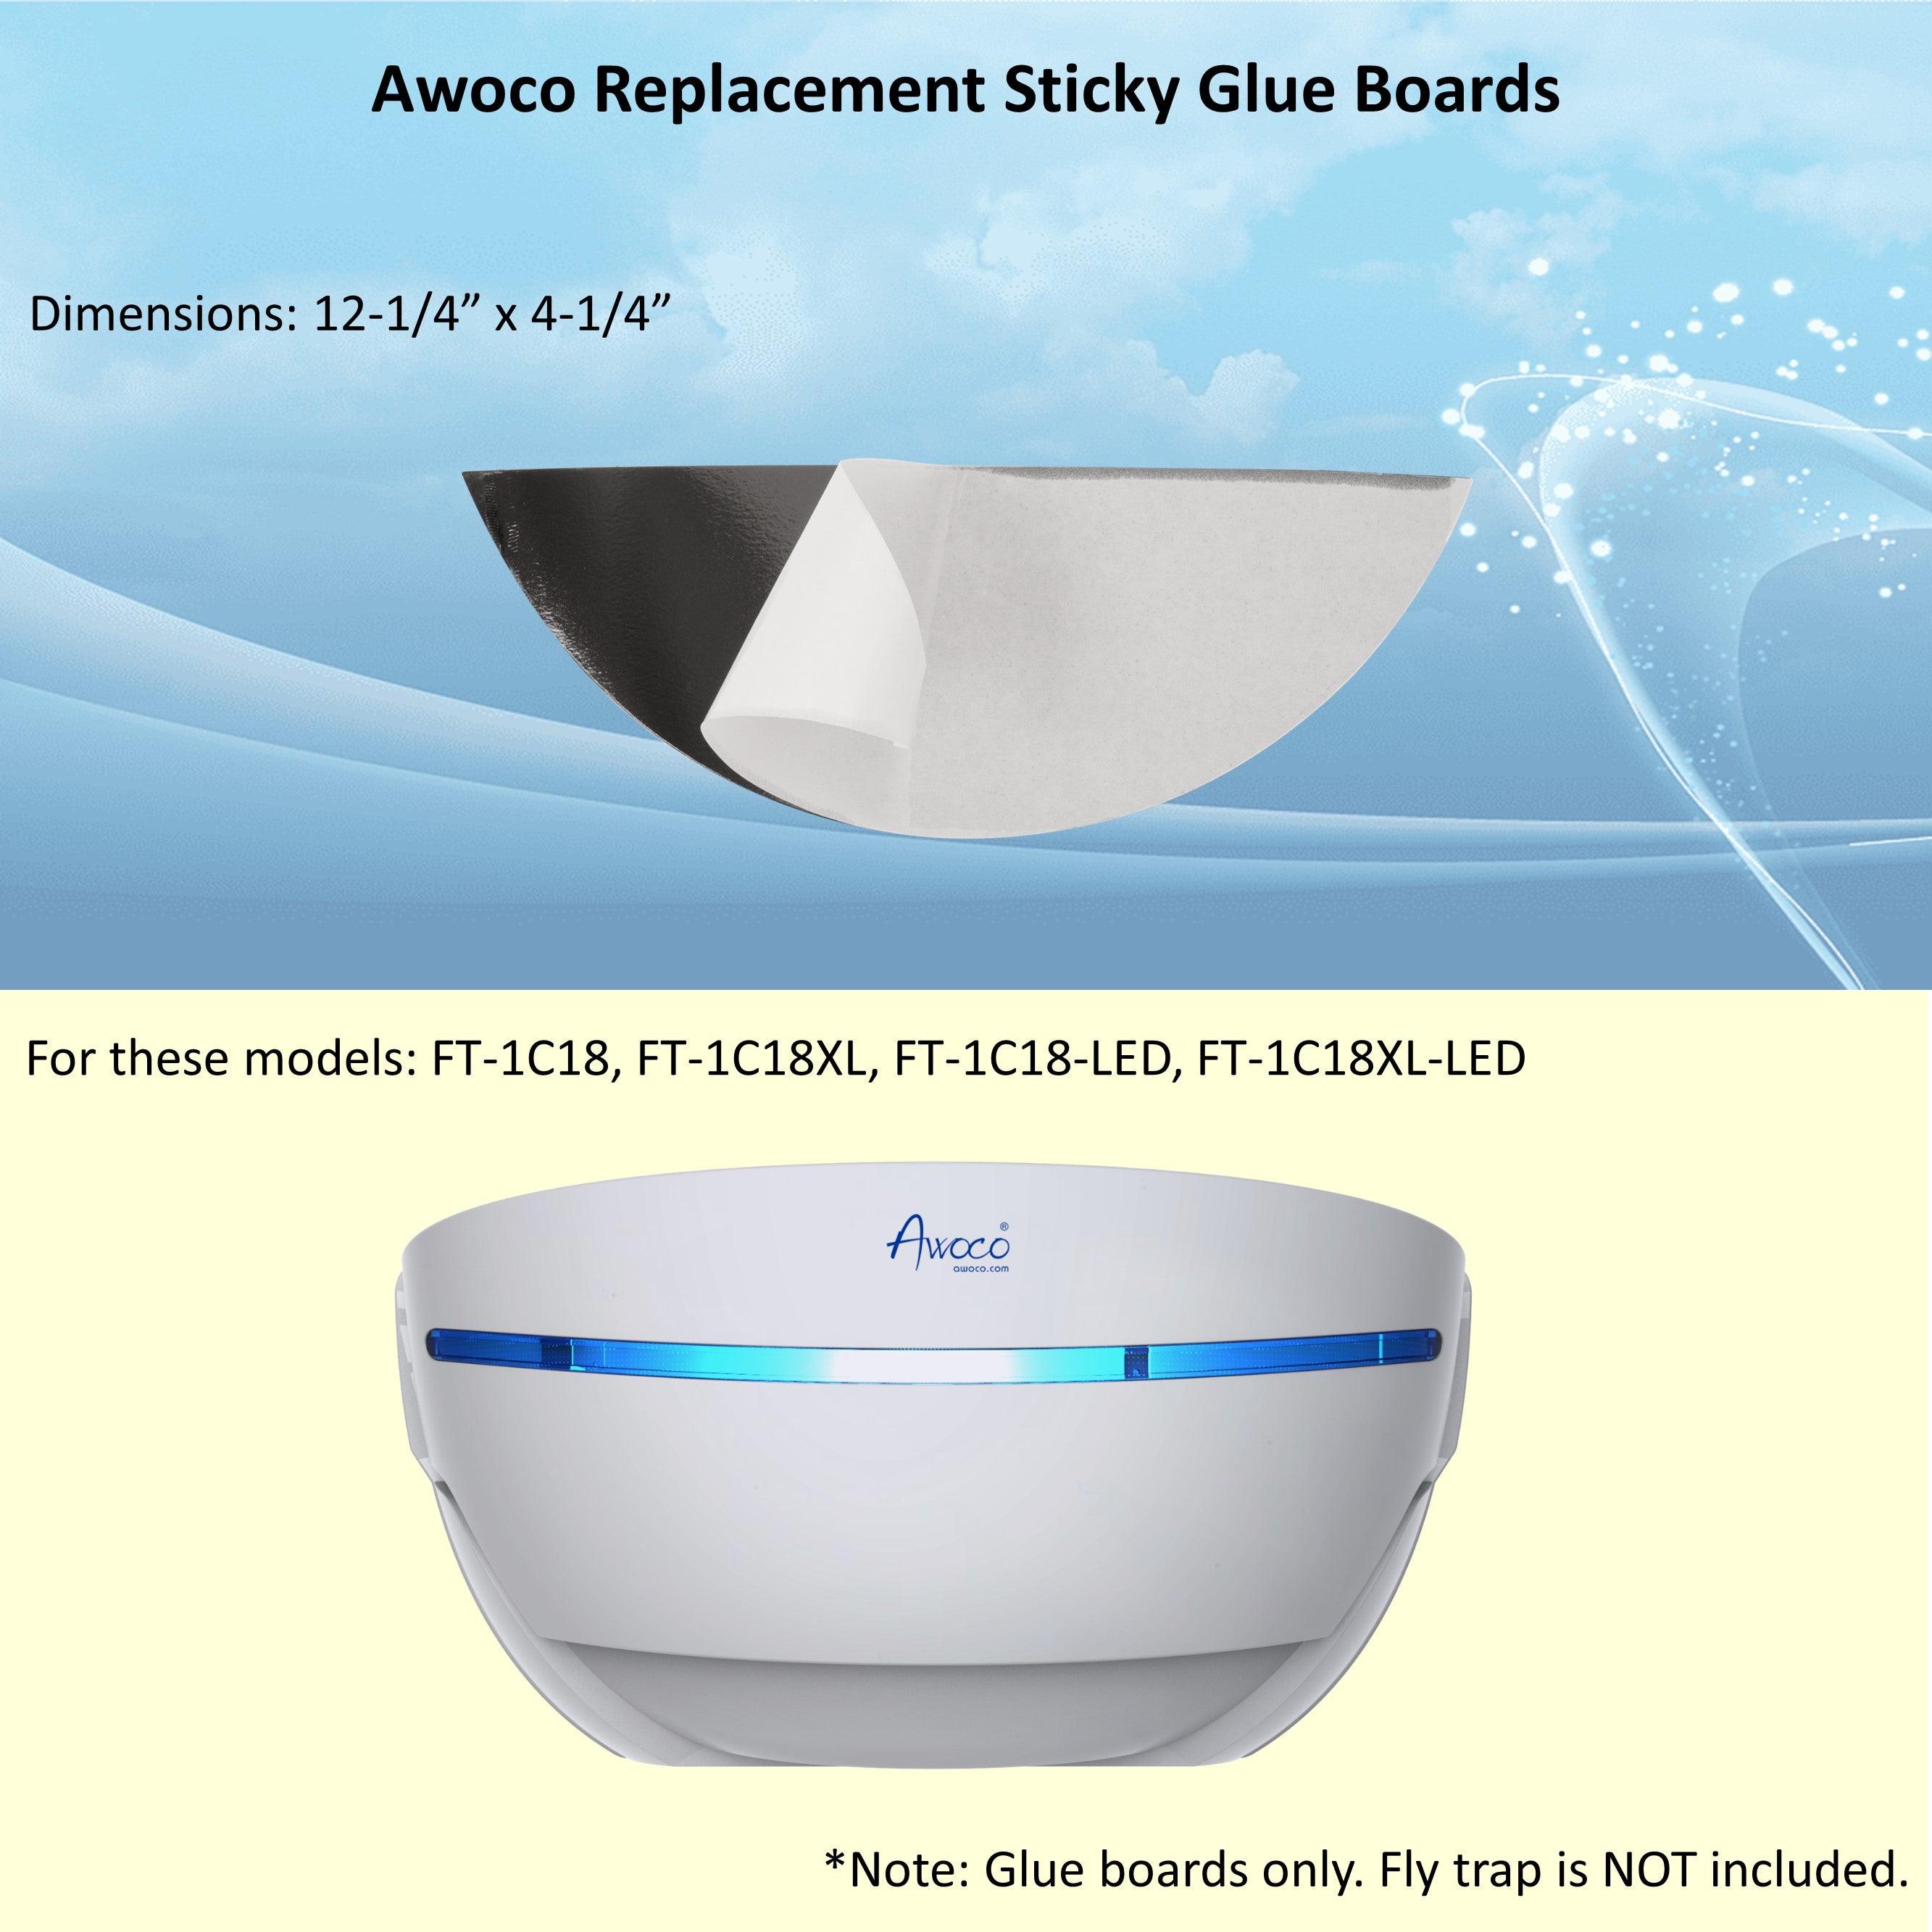 Awoco Pack of 5 Replacement Sticky Glue Boards for Sticky Fly Trap Lamp for Capturing Flying Insects, Flies, Mosquitoes, and Moths (5 Glue Boards for FT-1C18)